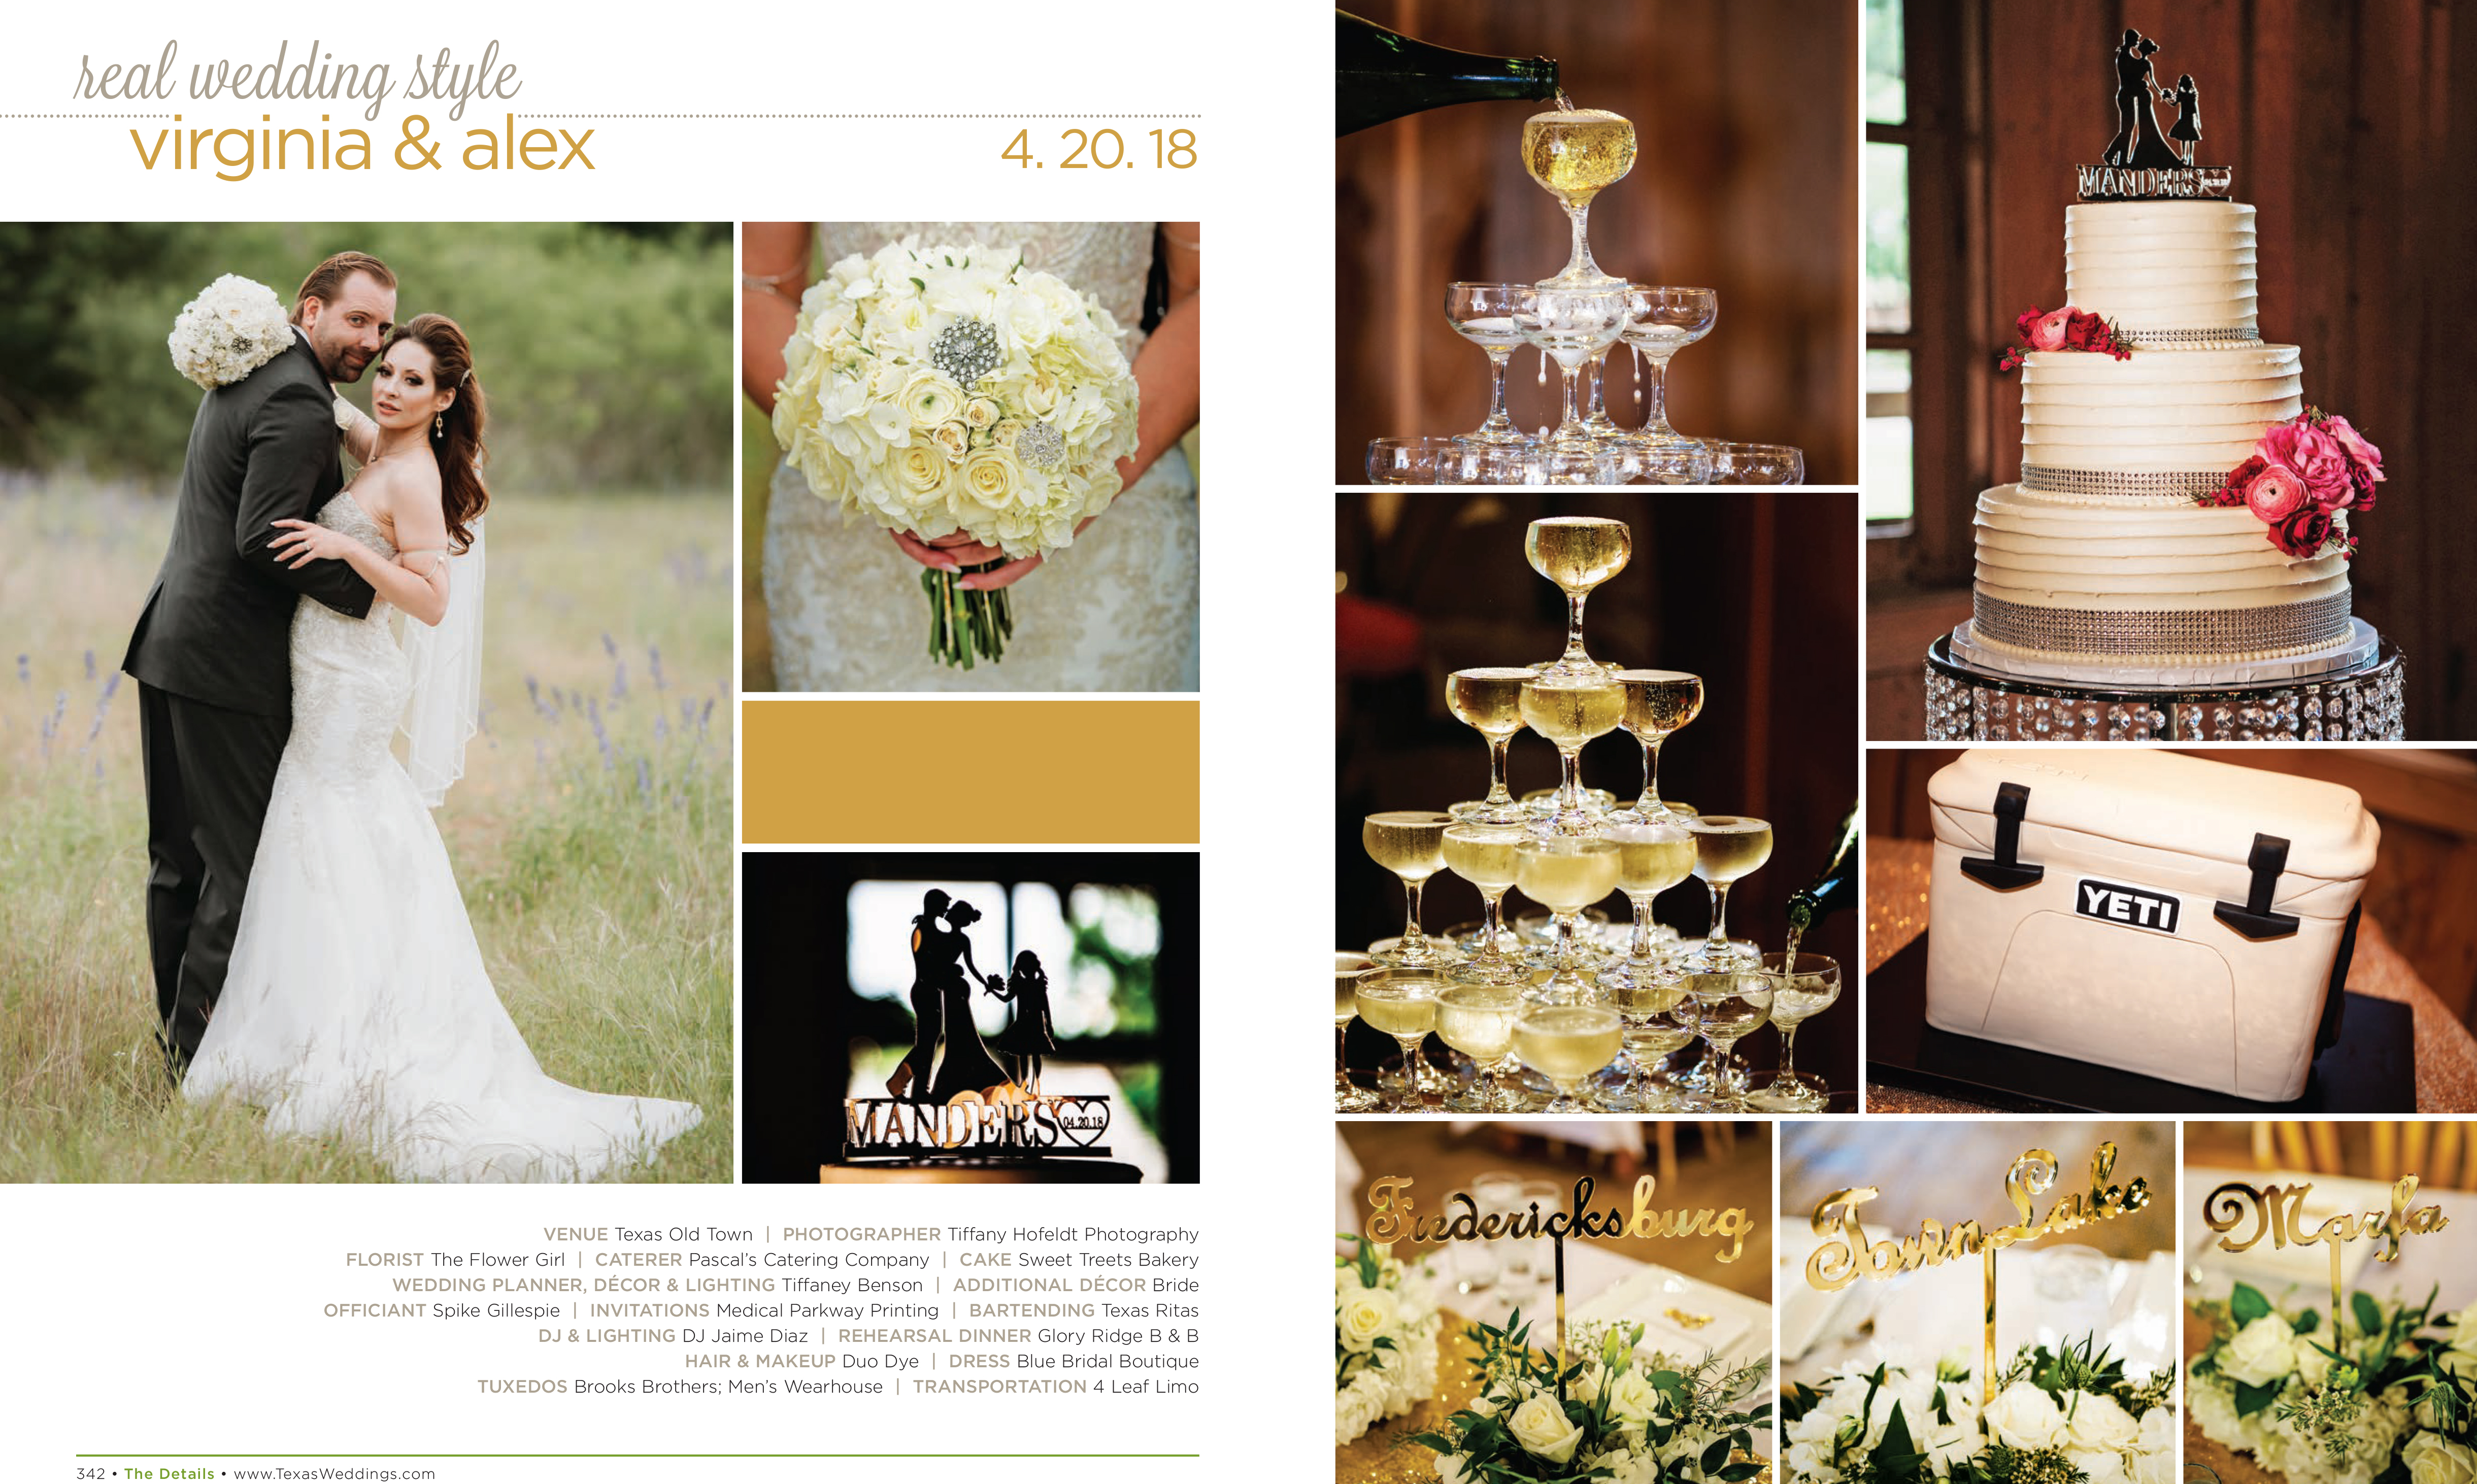 Virginia & Alex in their Real Wedding Page in the Spring/Summer 2019 Texas Wedding Guide